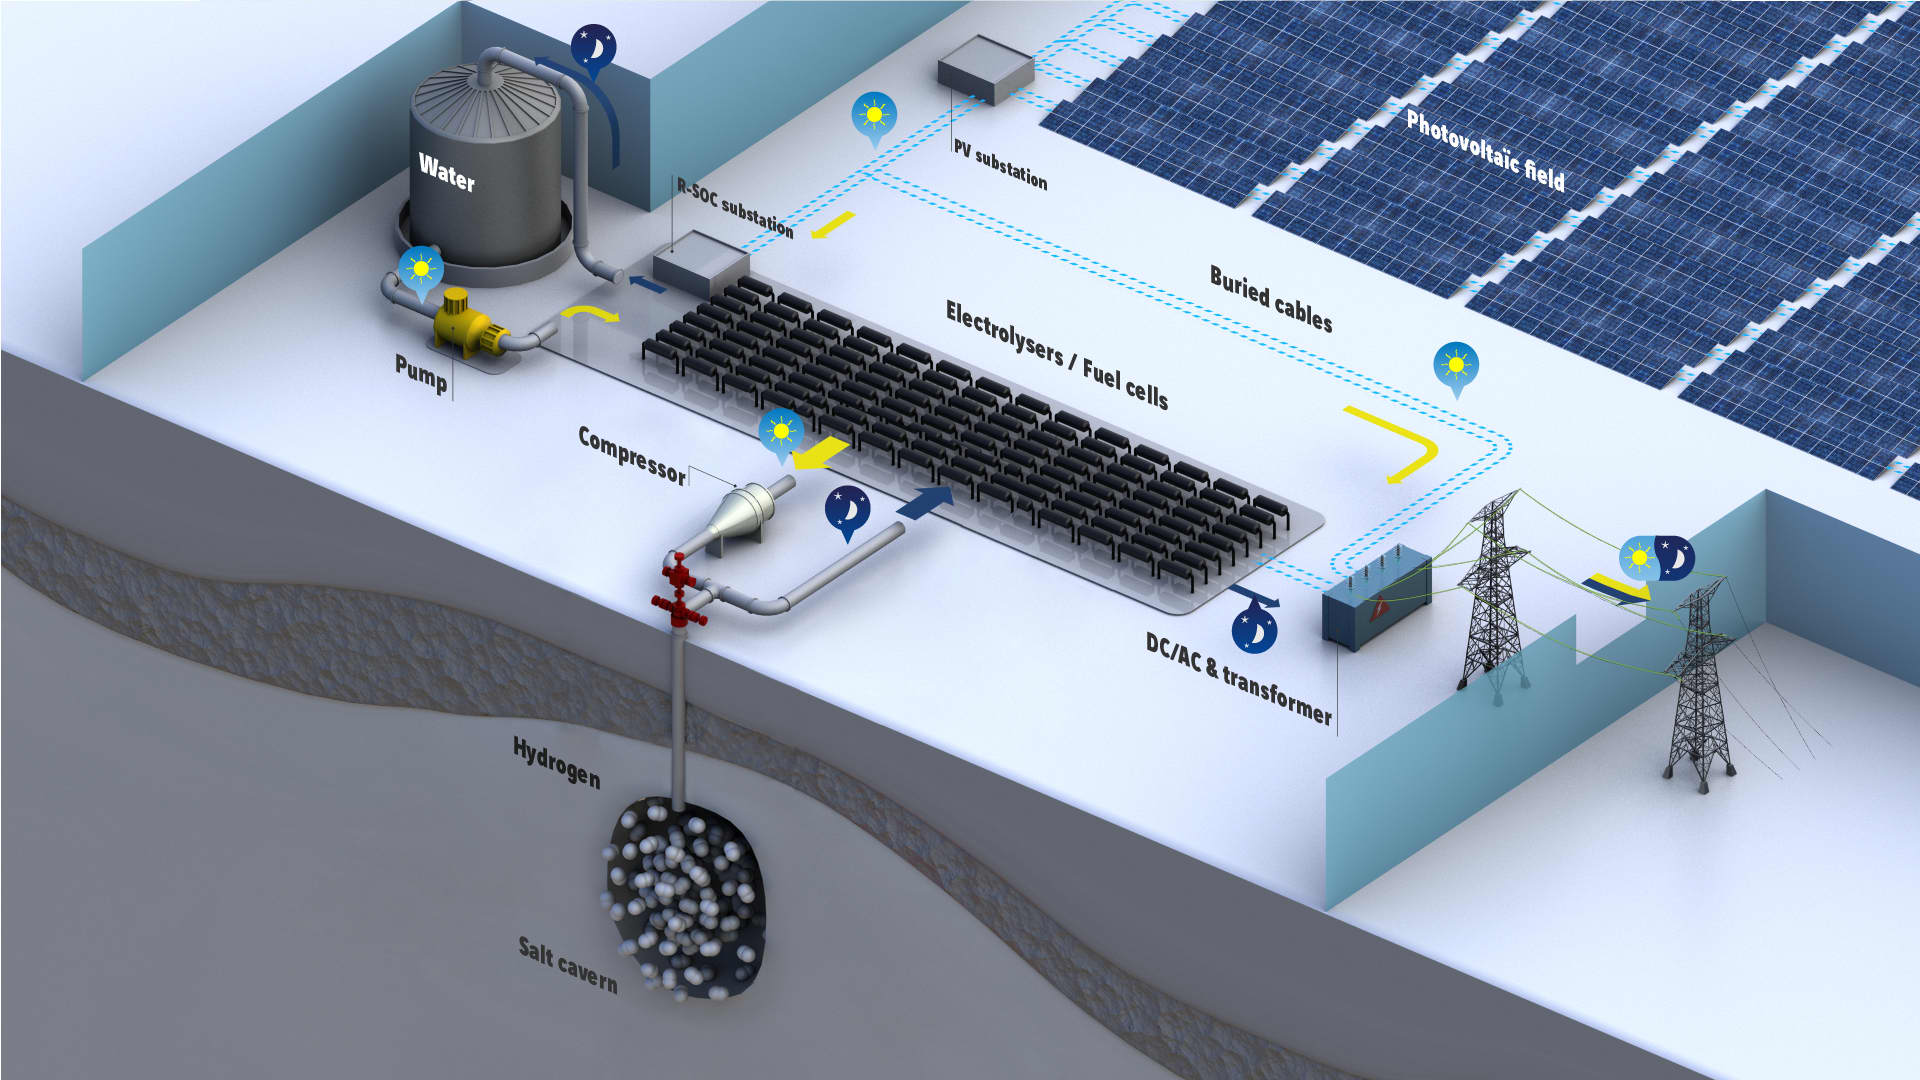 Hydrogen can be produced with renewable energy from sources like solar panels and then stored under the ground in salt caverns for future use.